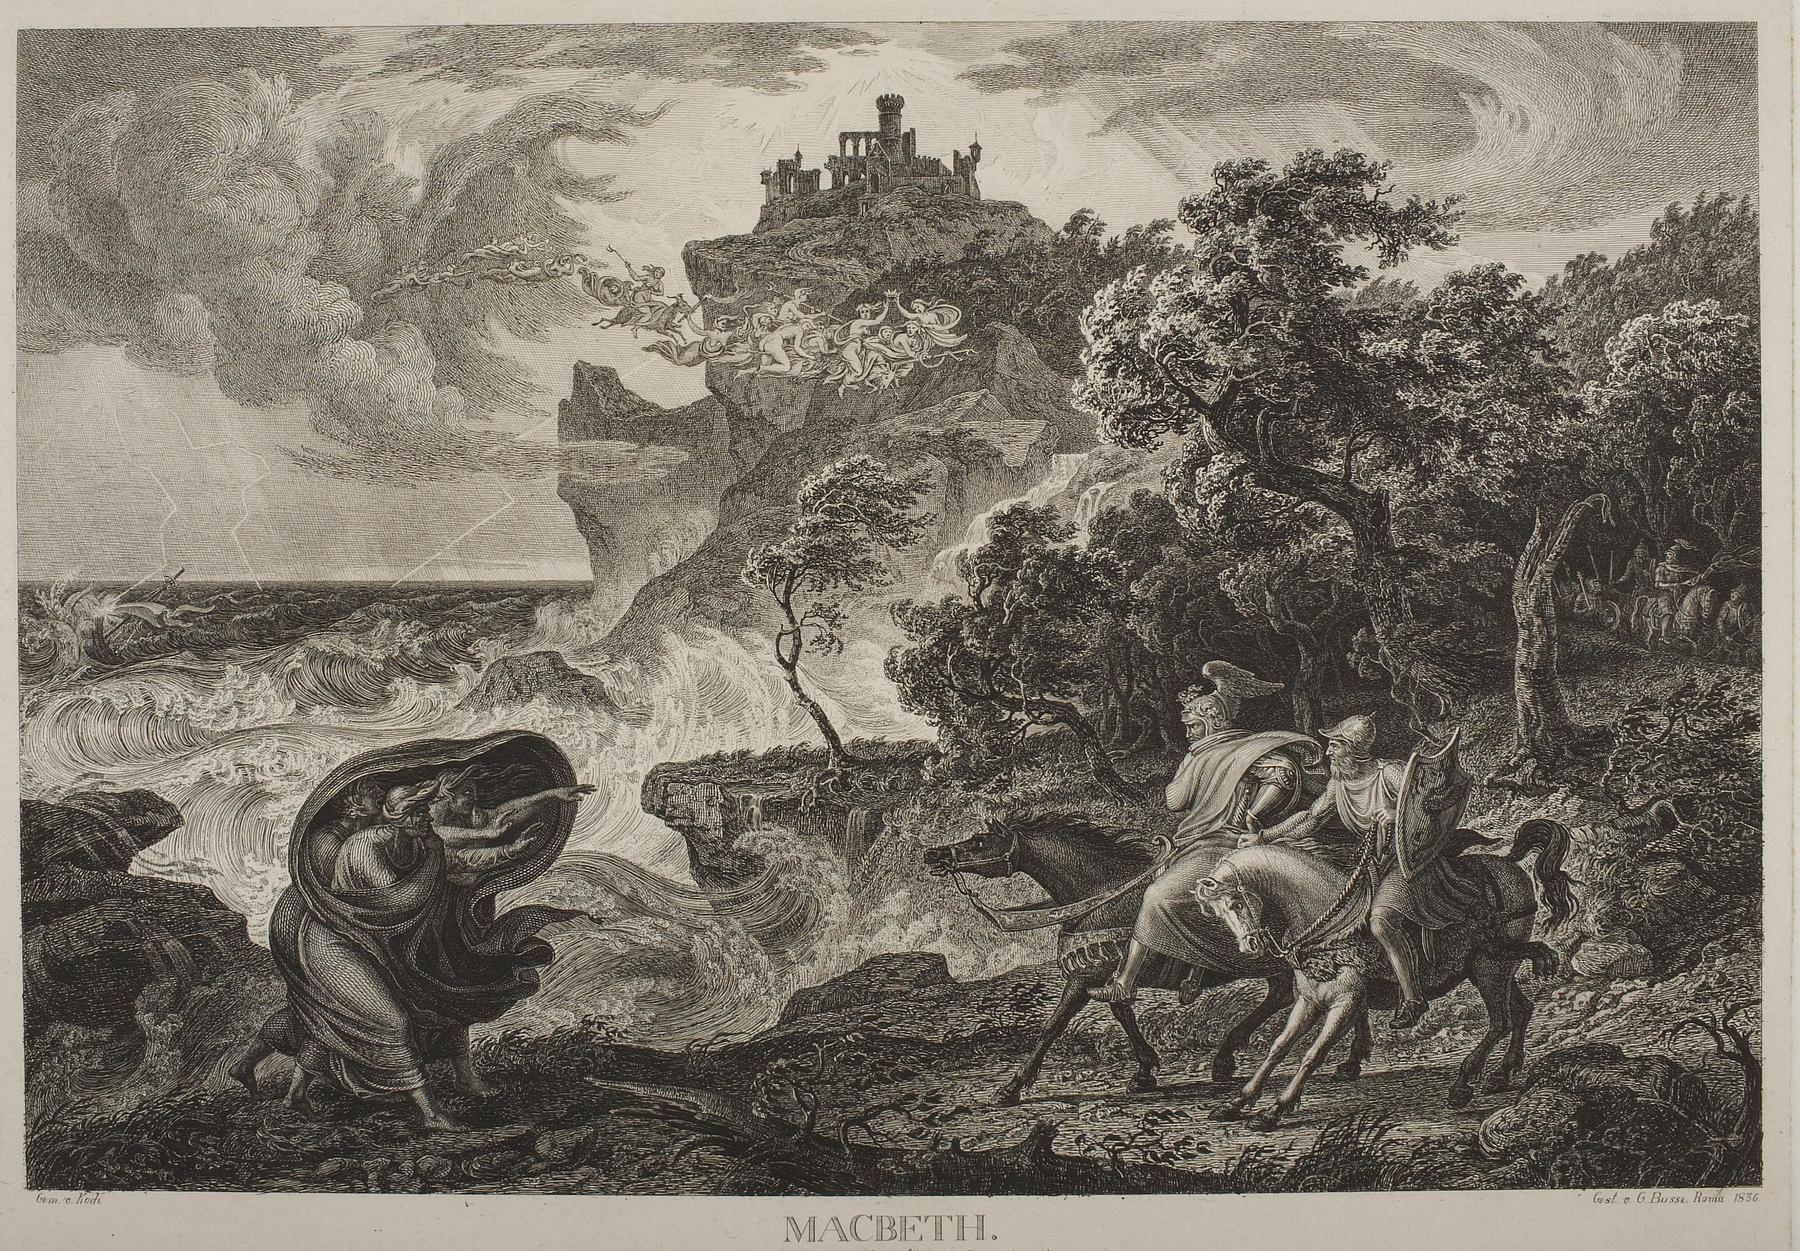 Macbeth and the Witches, E388